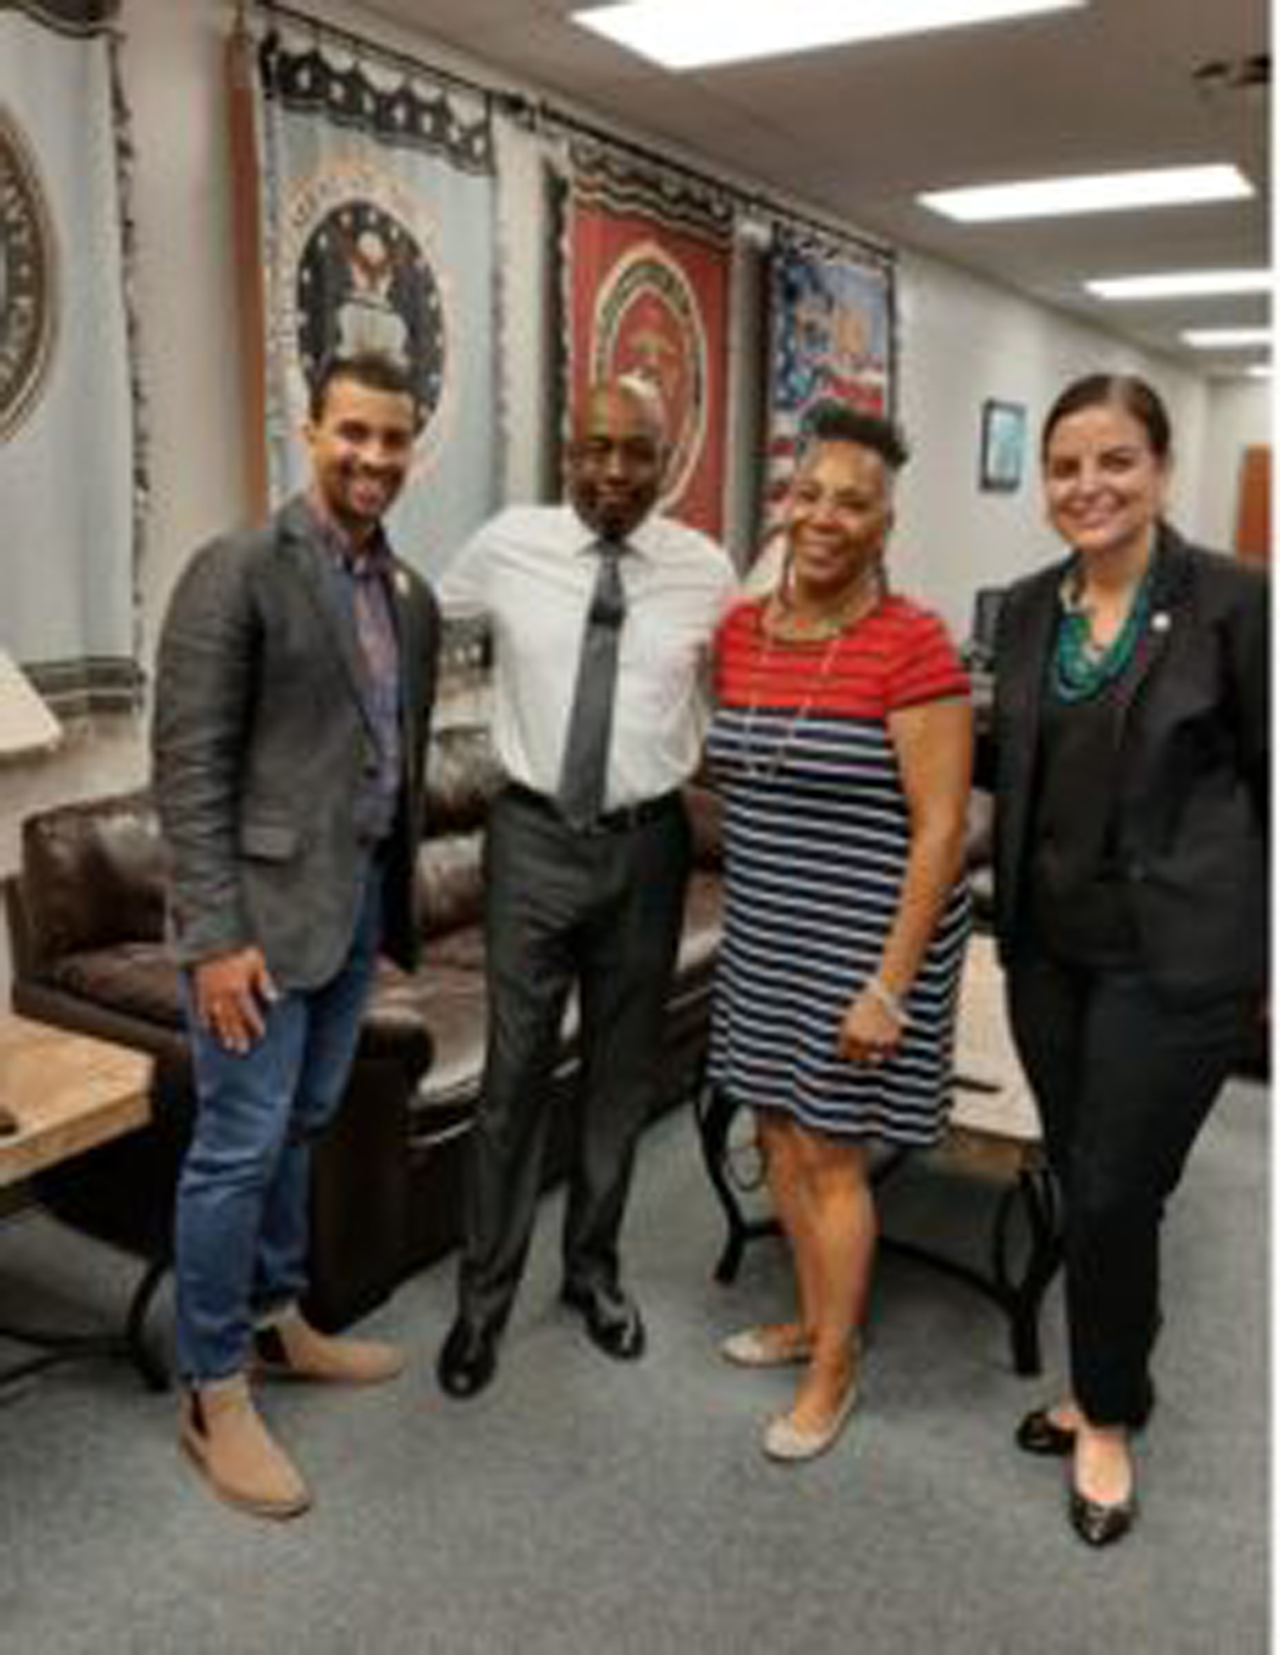 Ohio Valley Goodwill Industries welcomed State Representatives Sedrick Denson, (33), Brigid Kelly, (31),  and Catherine Ingram, (32),  for a tour of its Employment and Training Center on Monday, September 9th